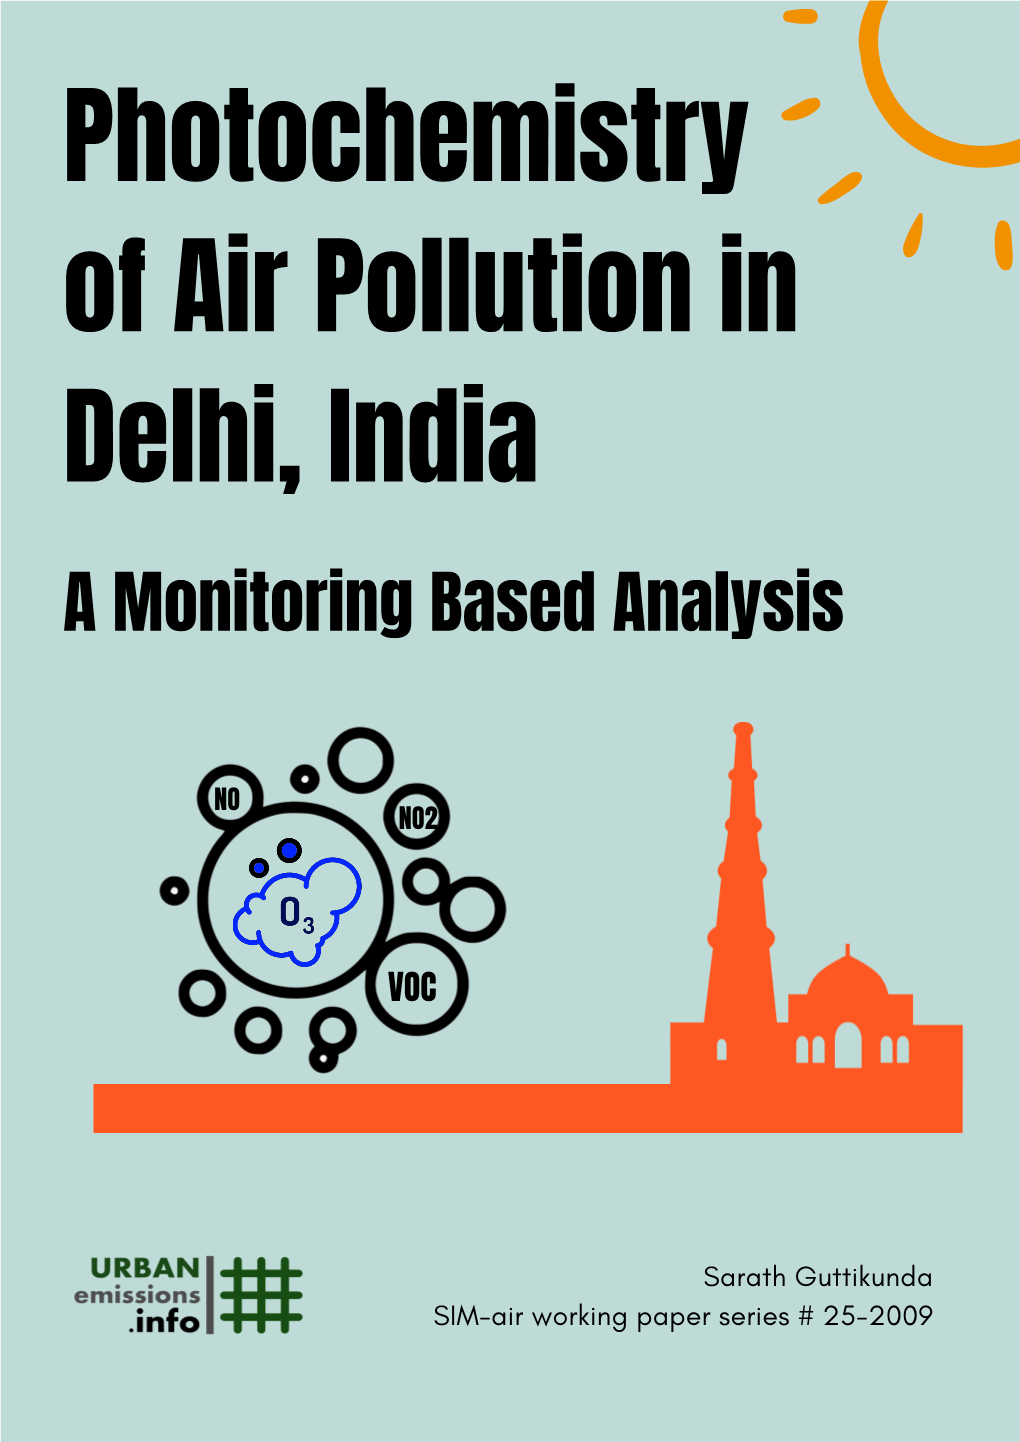 Photochemistry of Air Pollution in Delhi, India a Monitoring Based Analysis